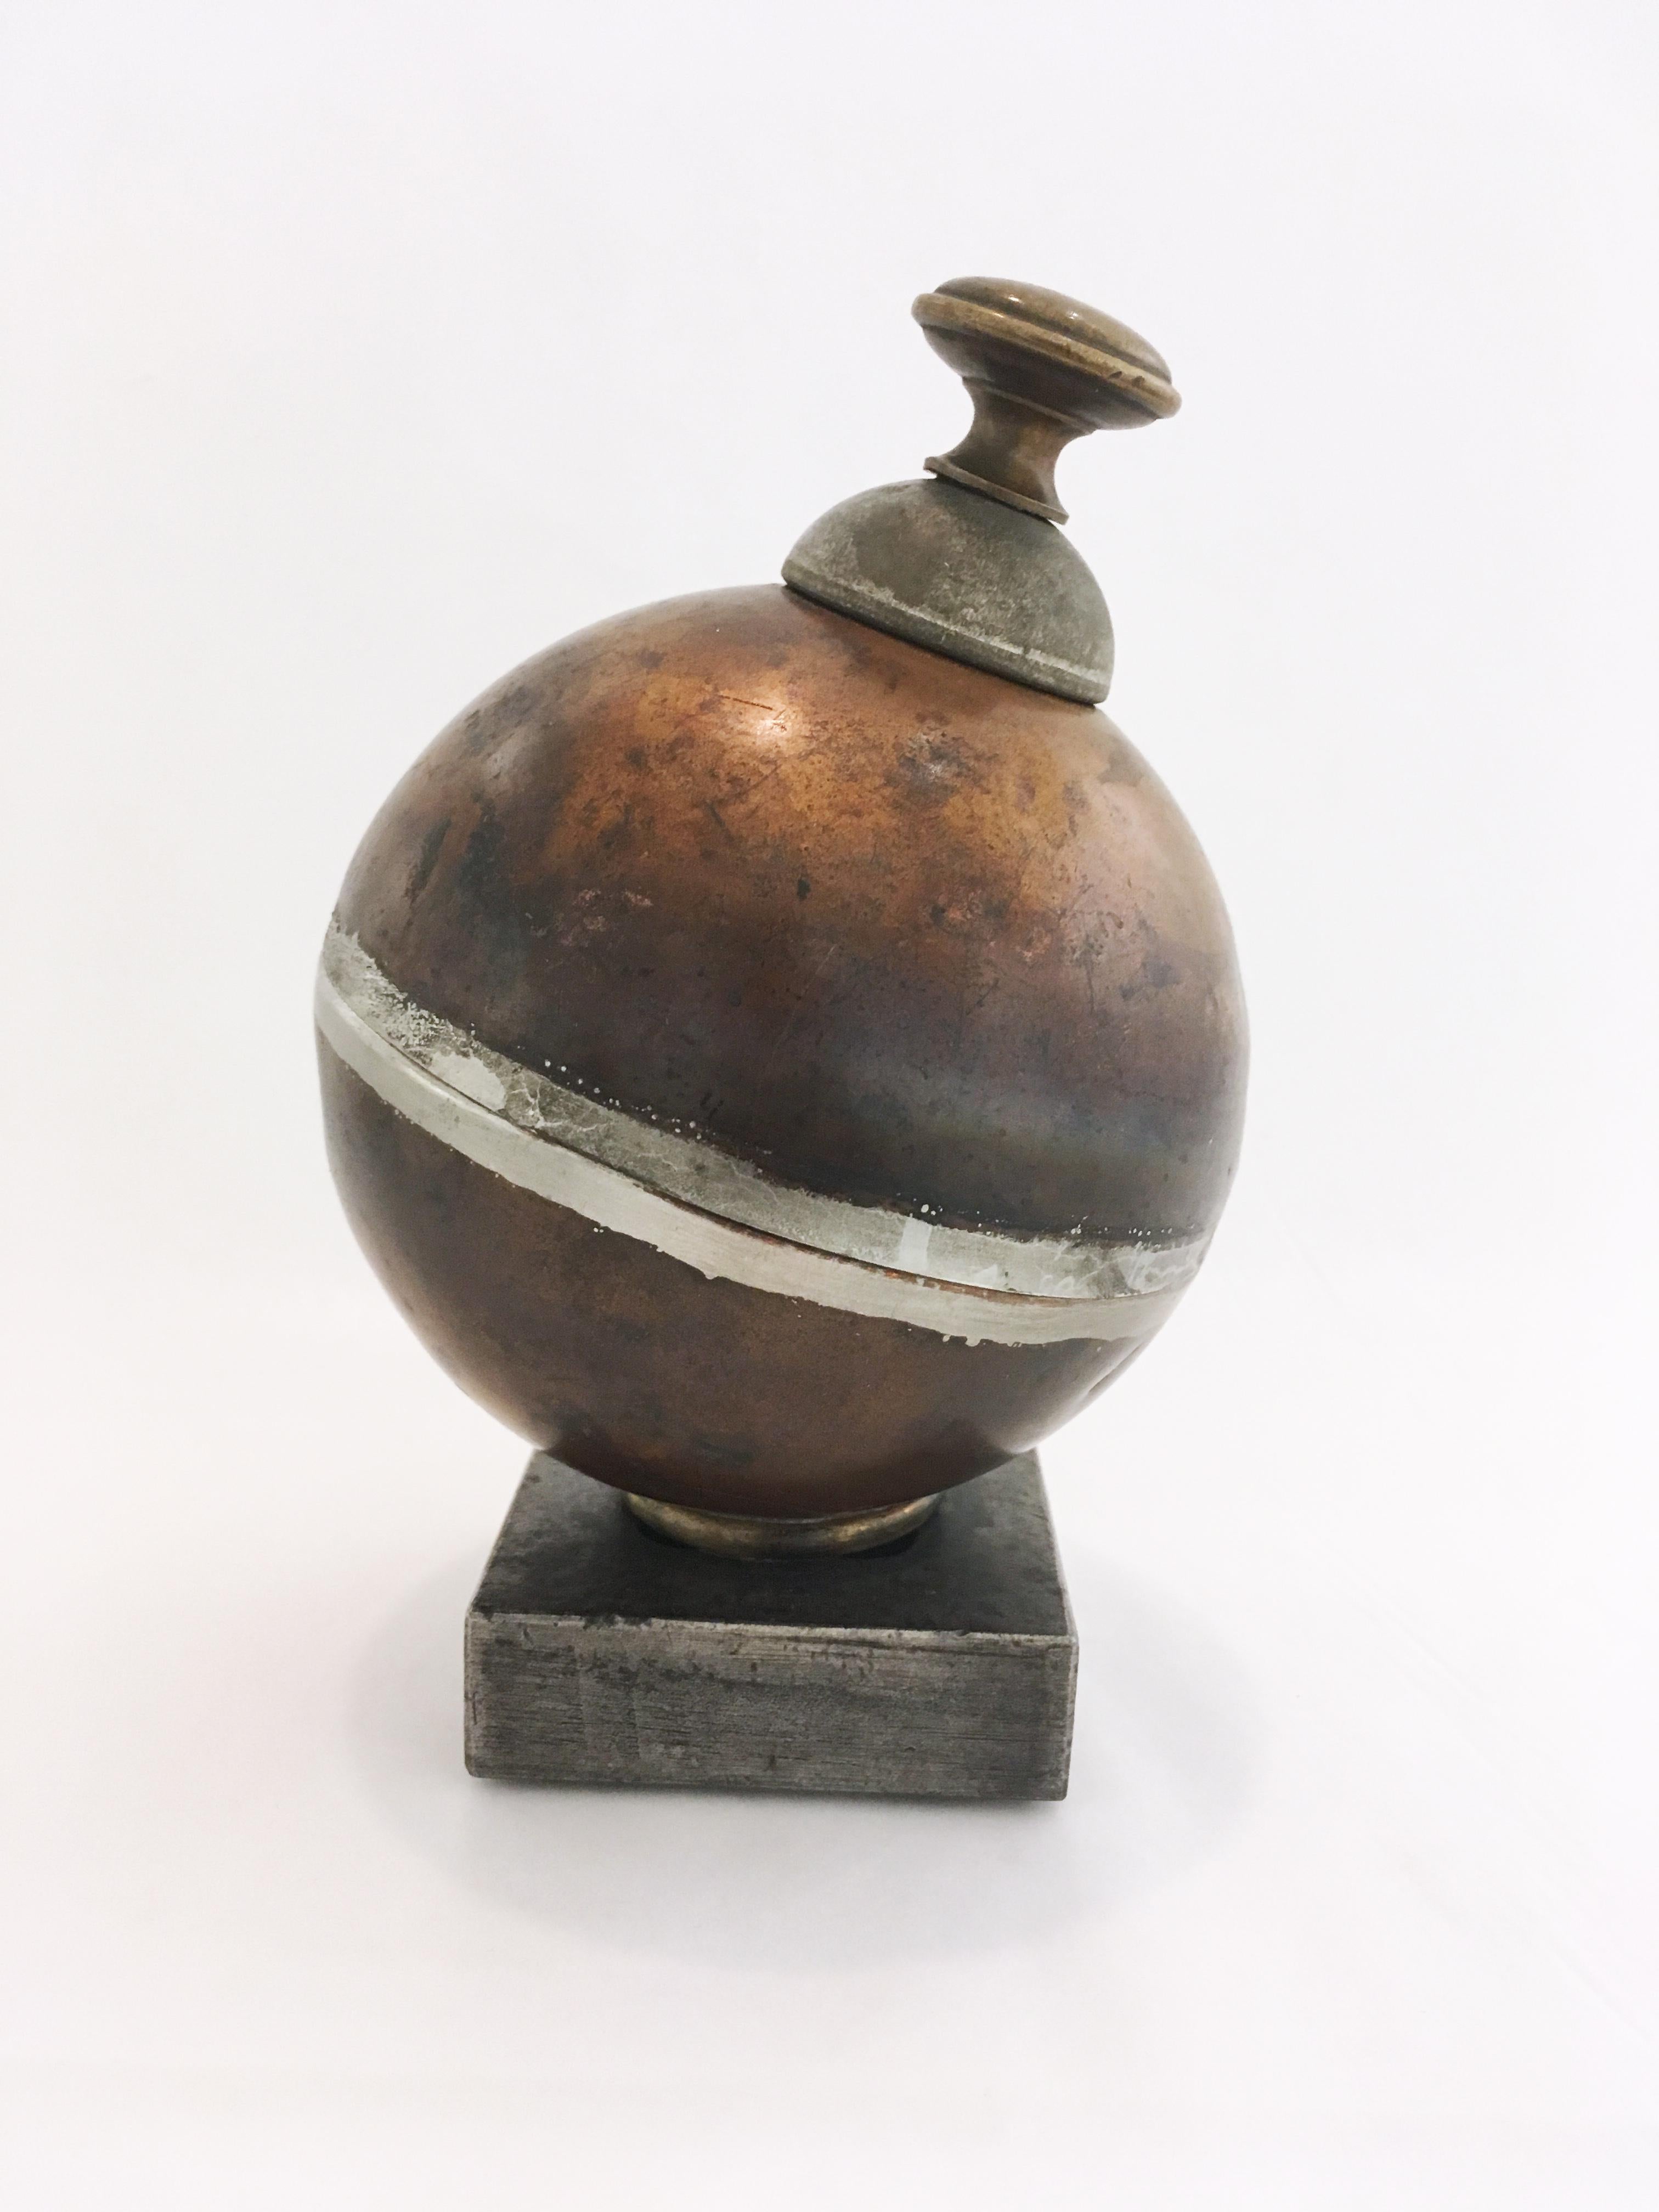 Float Stash, steel, brass, bone, found object, sculpture, sphere, abstract - Contemporary Sculpture by C. T. Bray